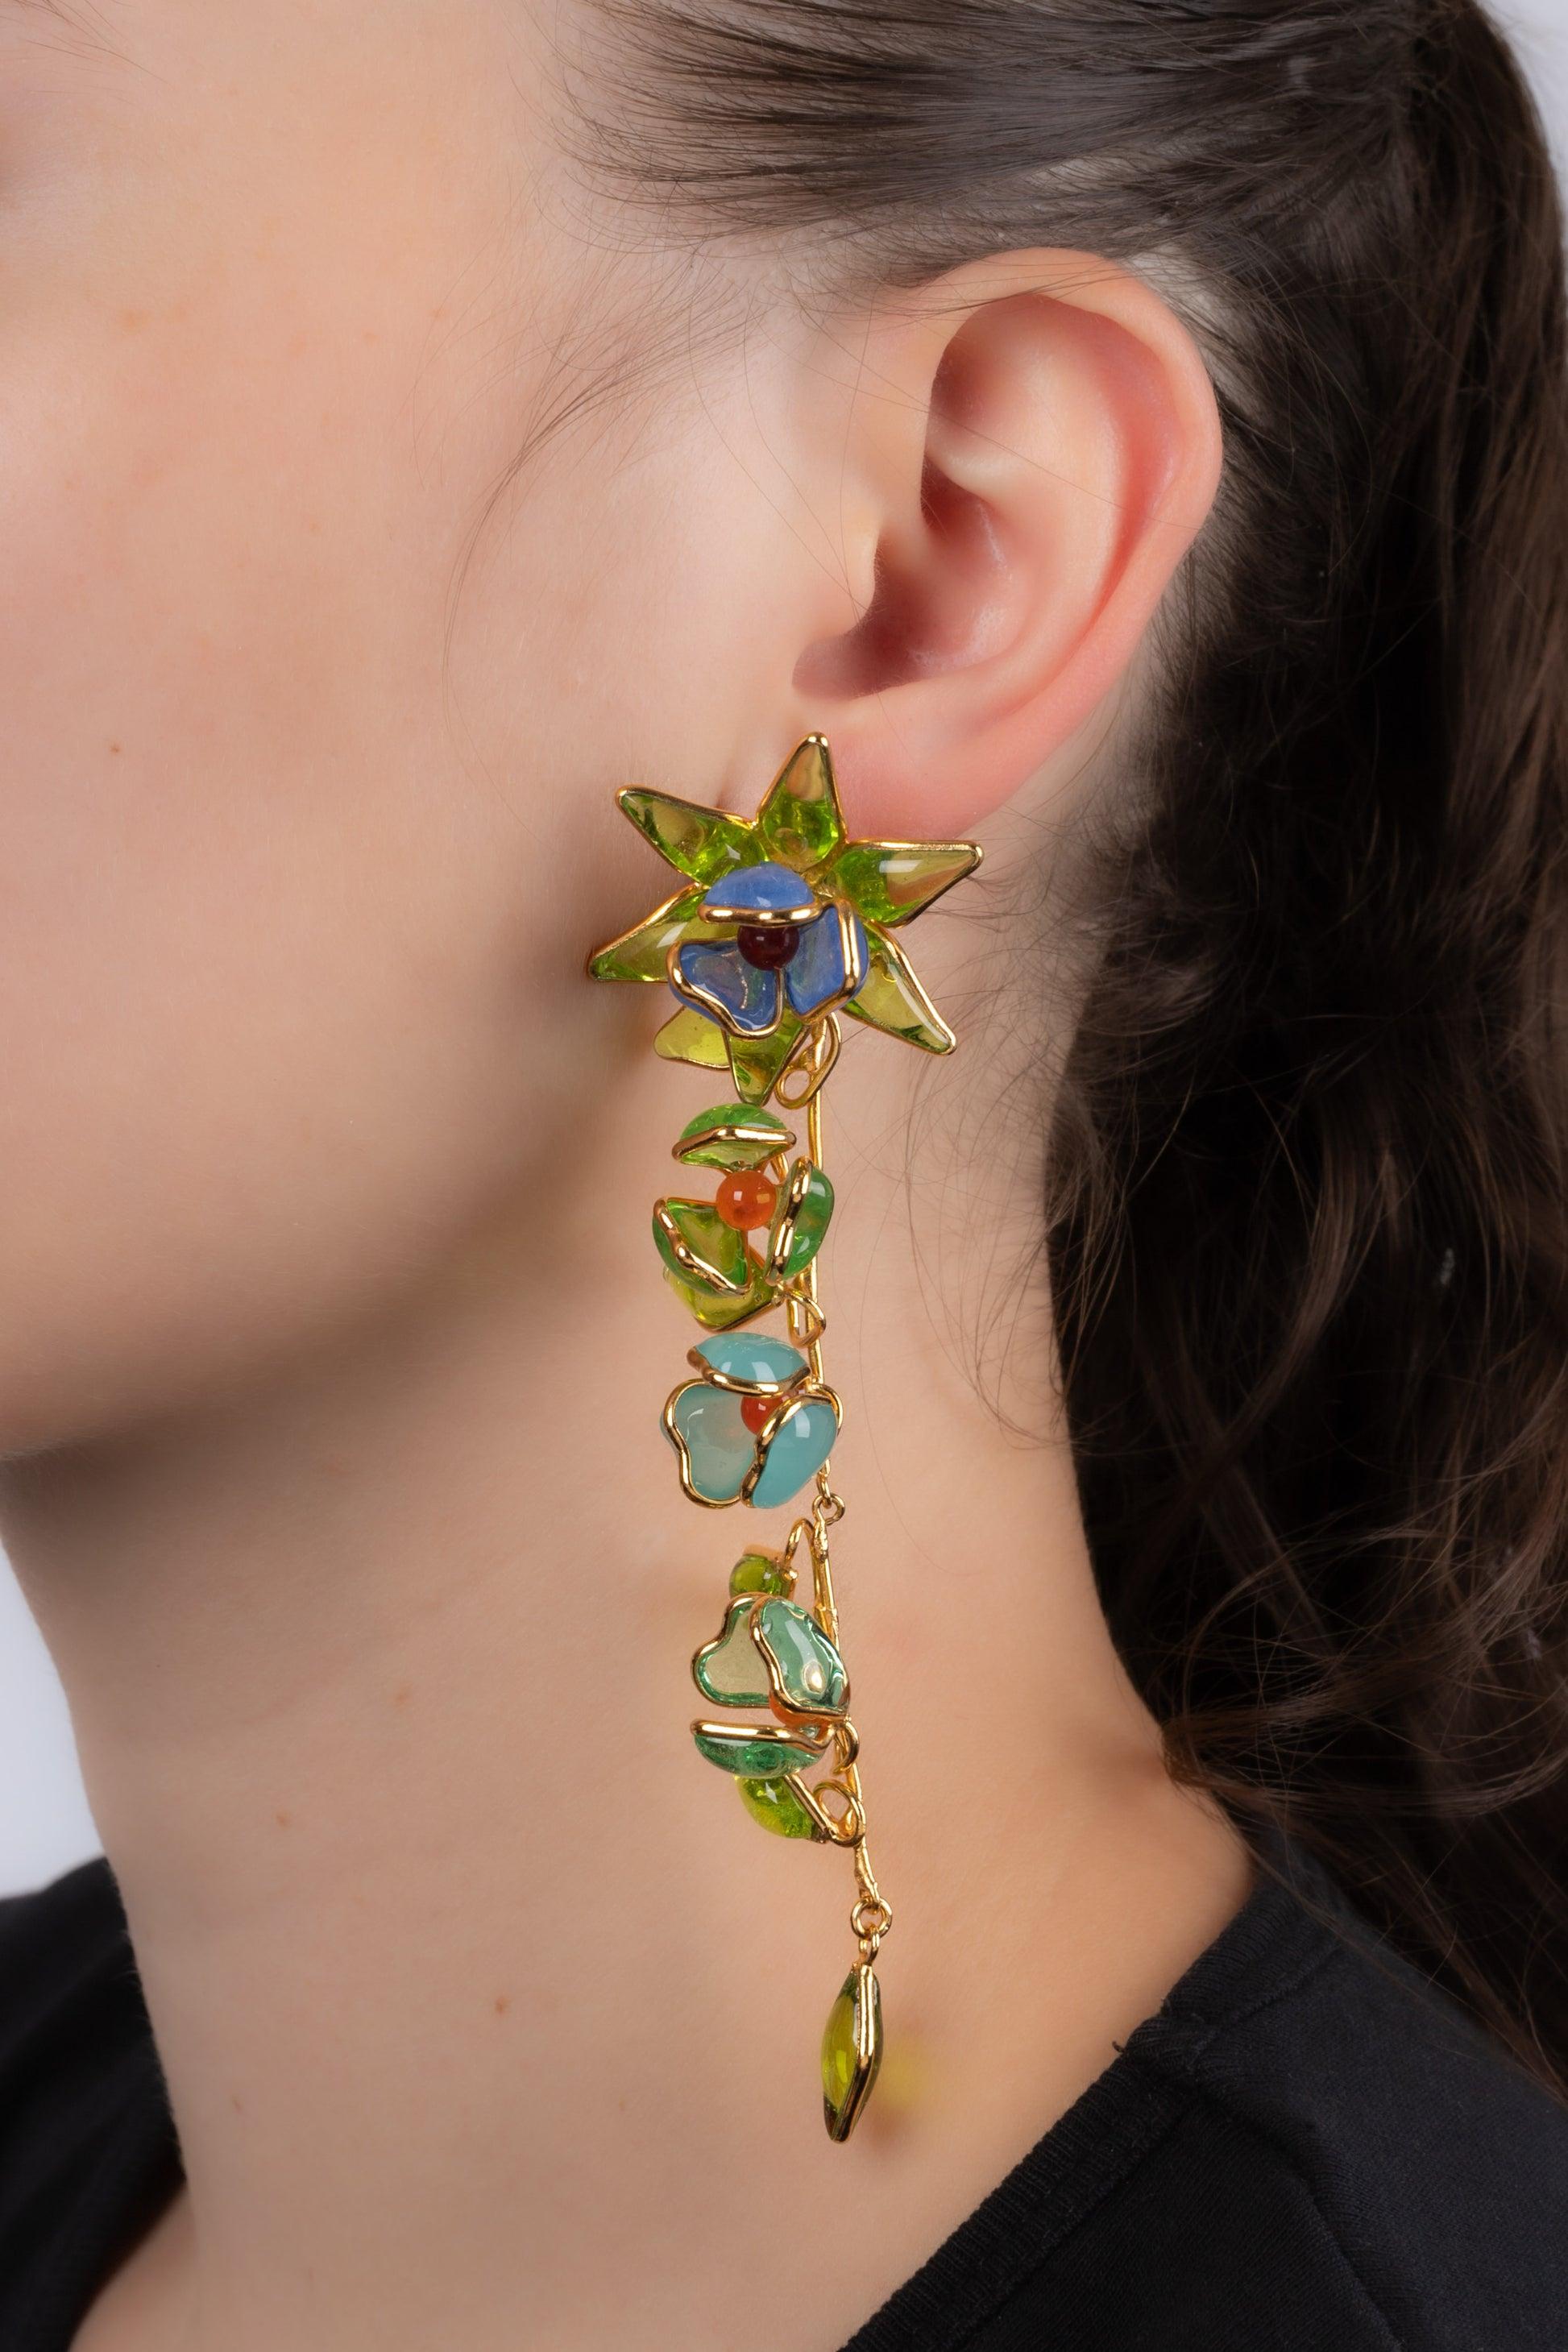 Augustine - Golden metal earrings with glass paste in blue and green tones.

Additional information:
Condition: Very good condition
Dimensions: Length: 12 cm

Seller Reference: BO240
